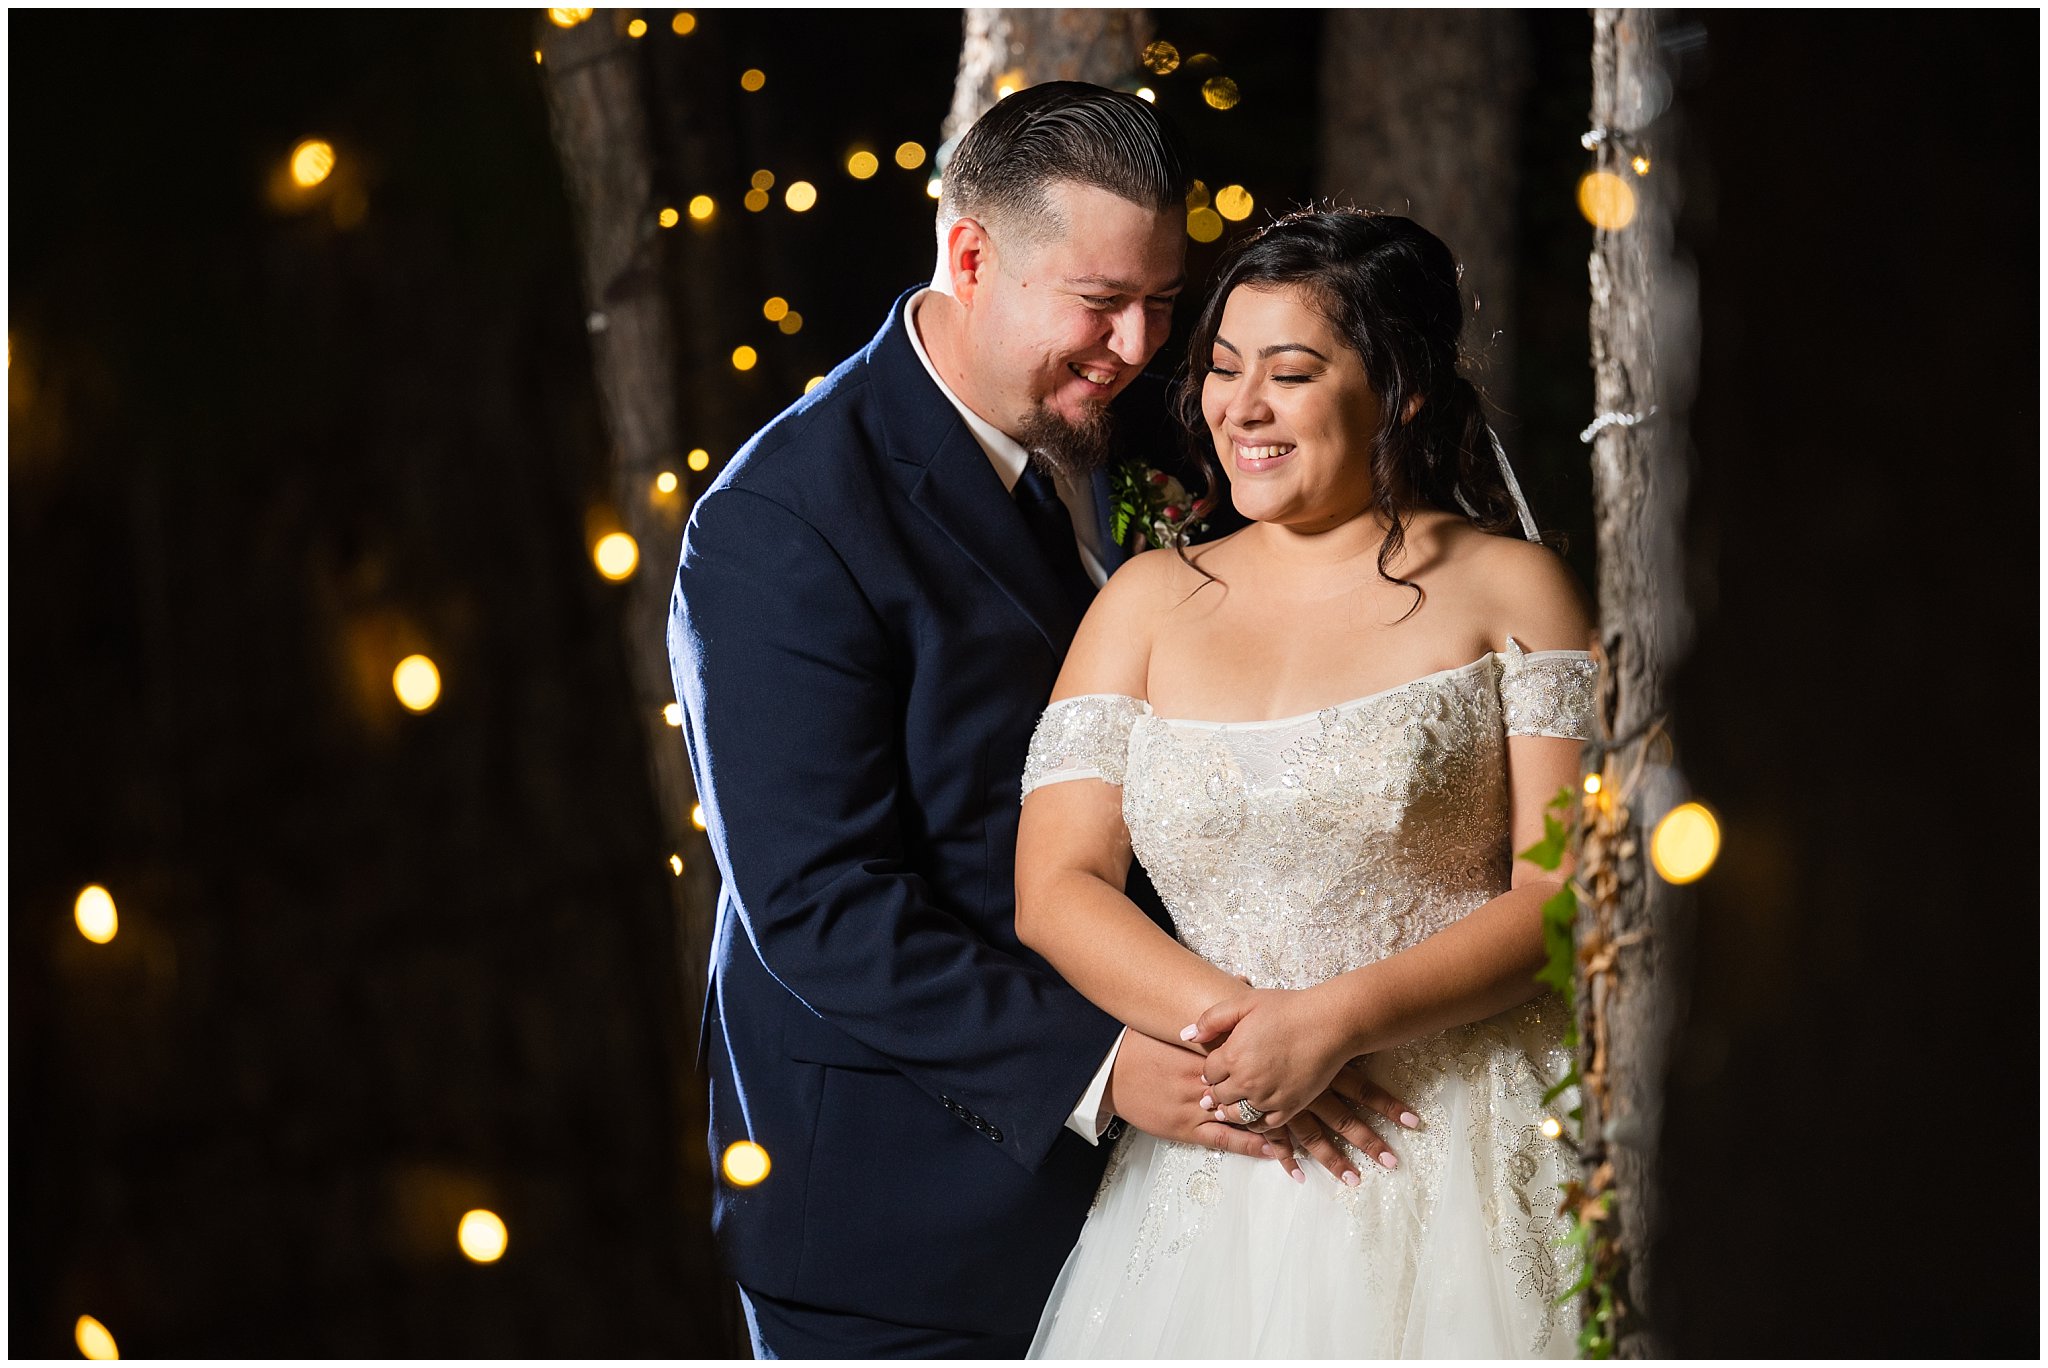 Bride and groom after dark night portraits | Rustic Mountain Destination Wedding at Oak Hills Utah | Jessie and Dallin Photography